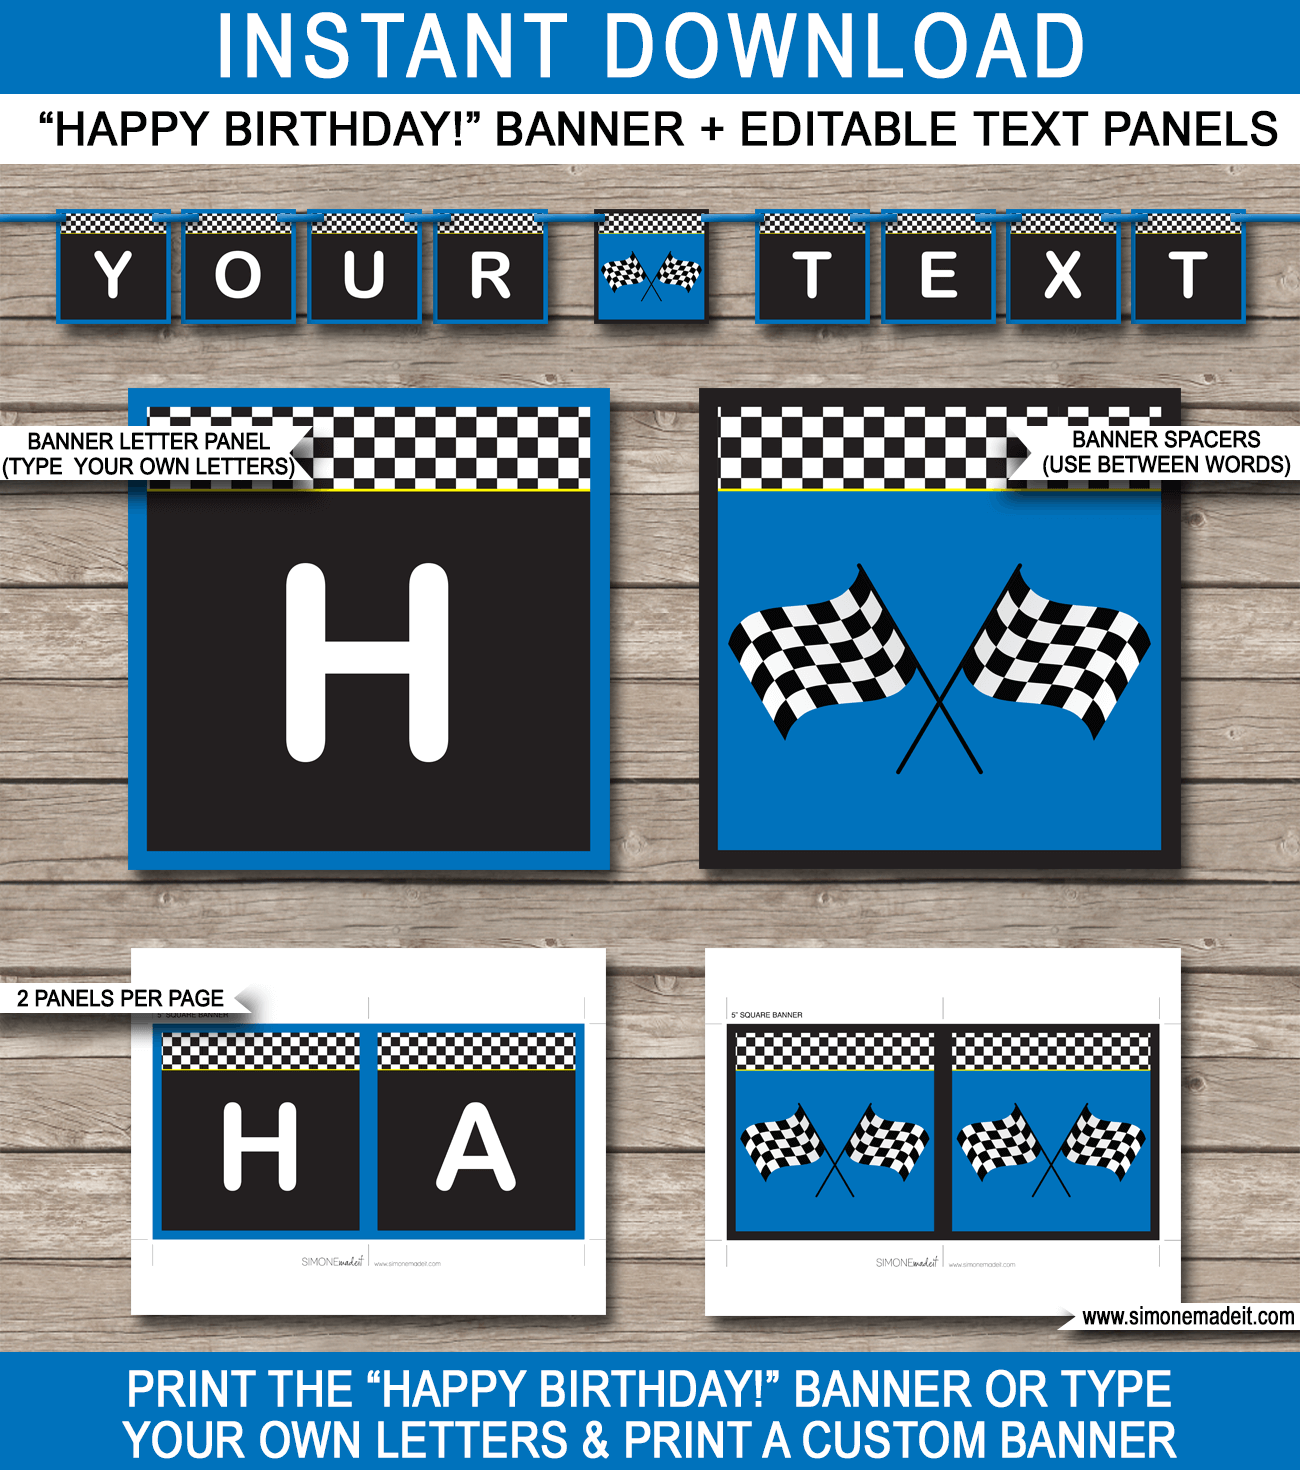 Blue Race Car Party Pennant Banner Template - Race Car Bunting - Happy Birthday Banner - Birthday Party - Editable and Printable DIY Template - INSTANT DOWNLOAD $4.50 via simonemadeit.com